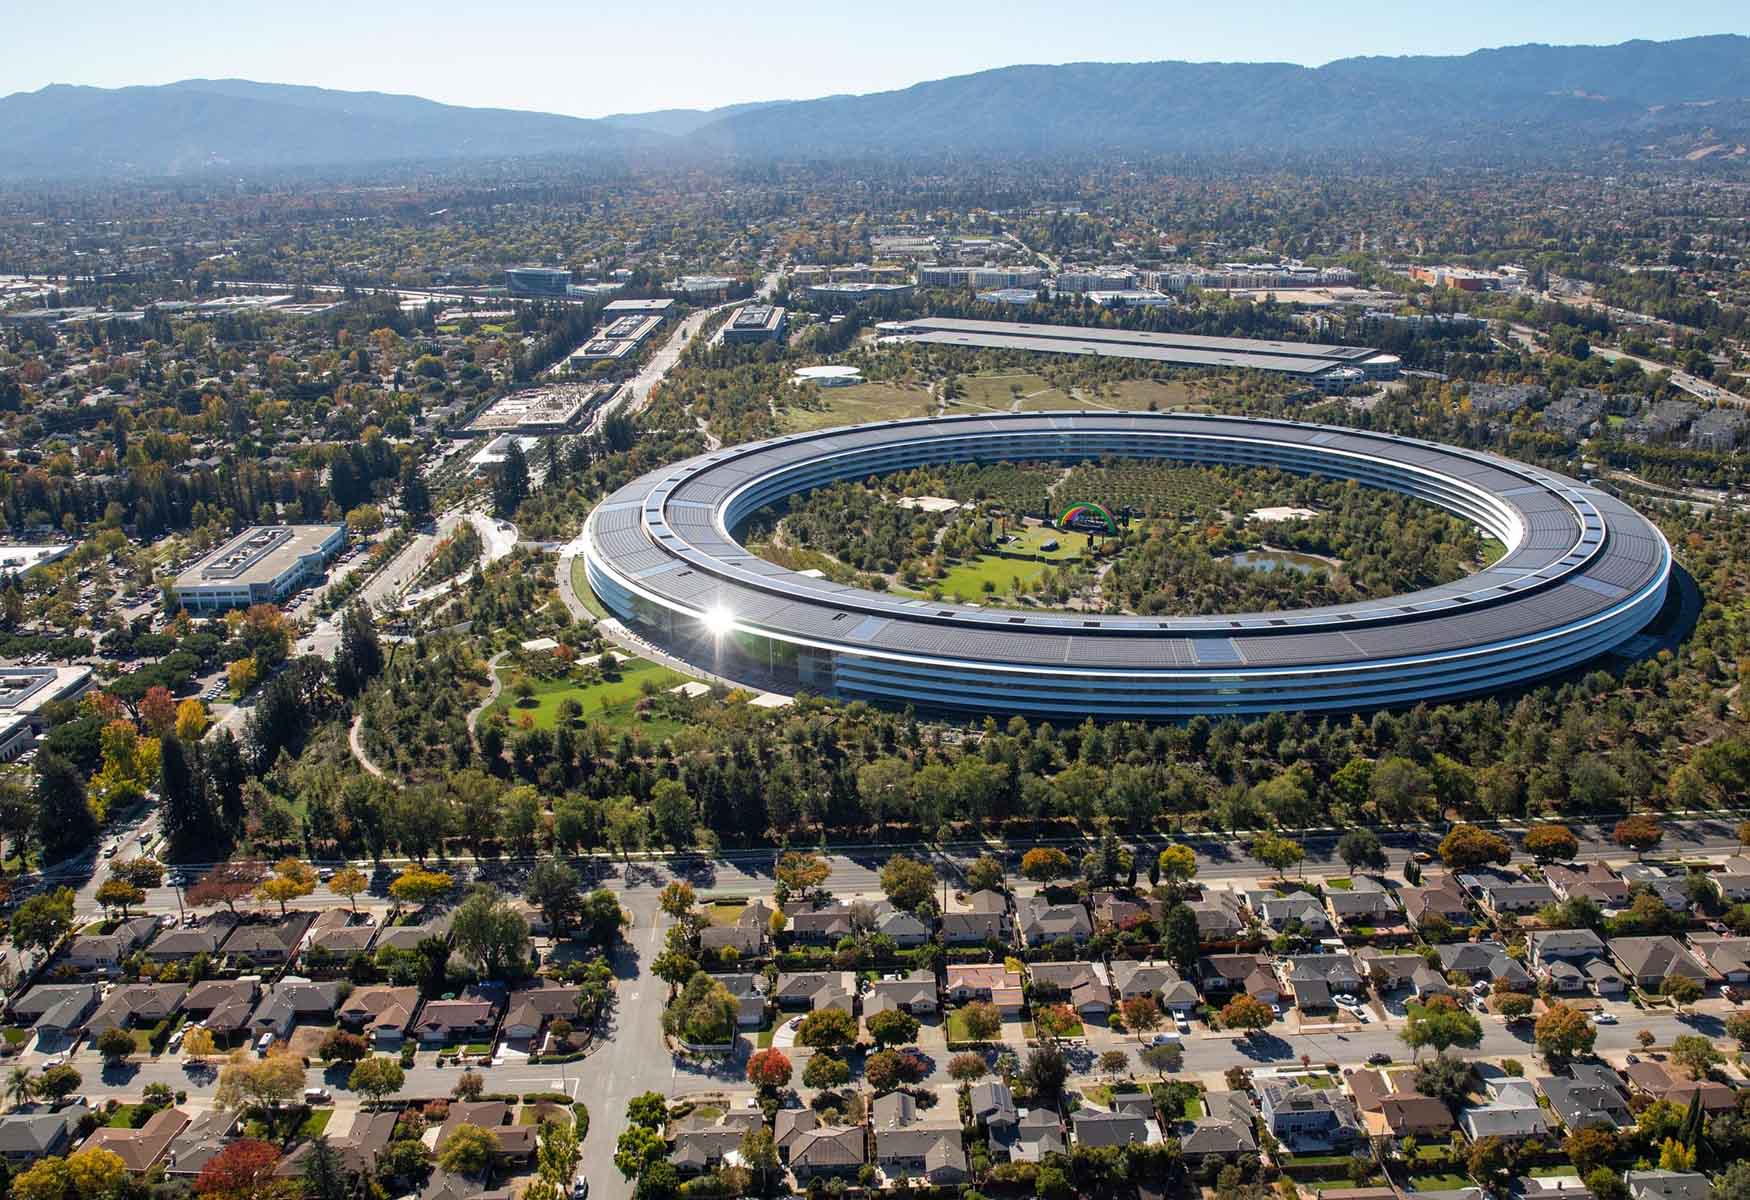 15-facts-about-prominent-industries-and-economic-development-in-cupertino-california